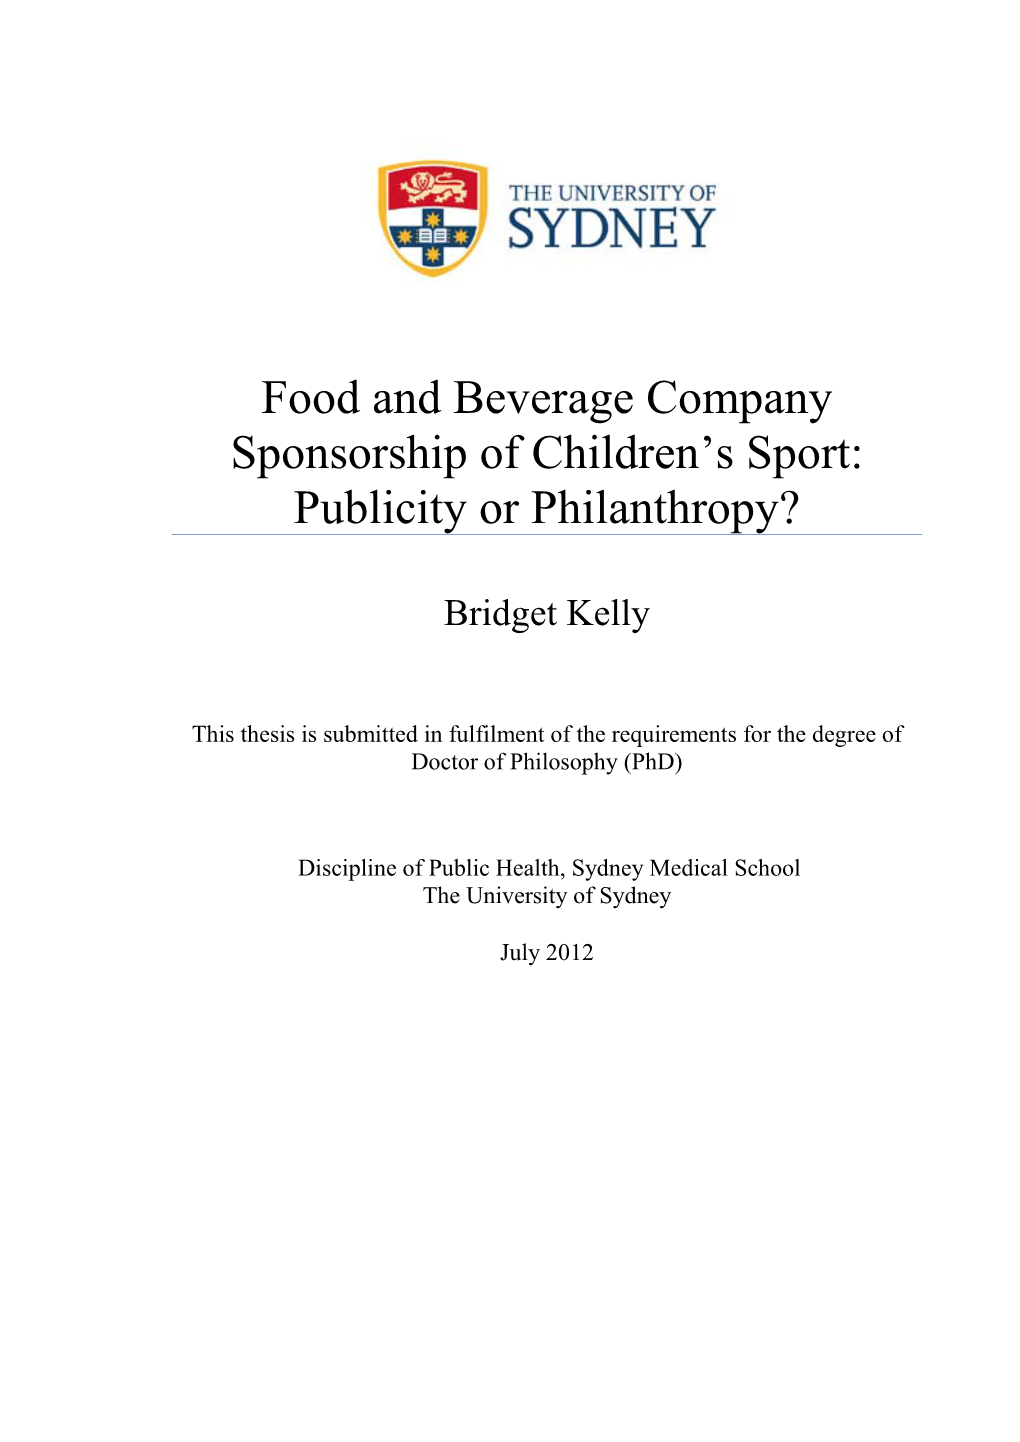 Food and Beverage Company Sponsorship of Children's